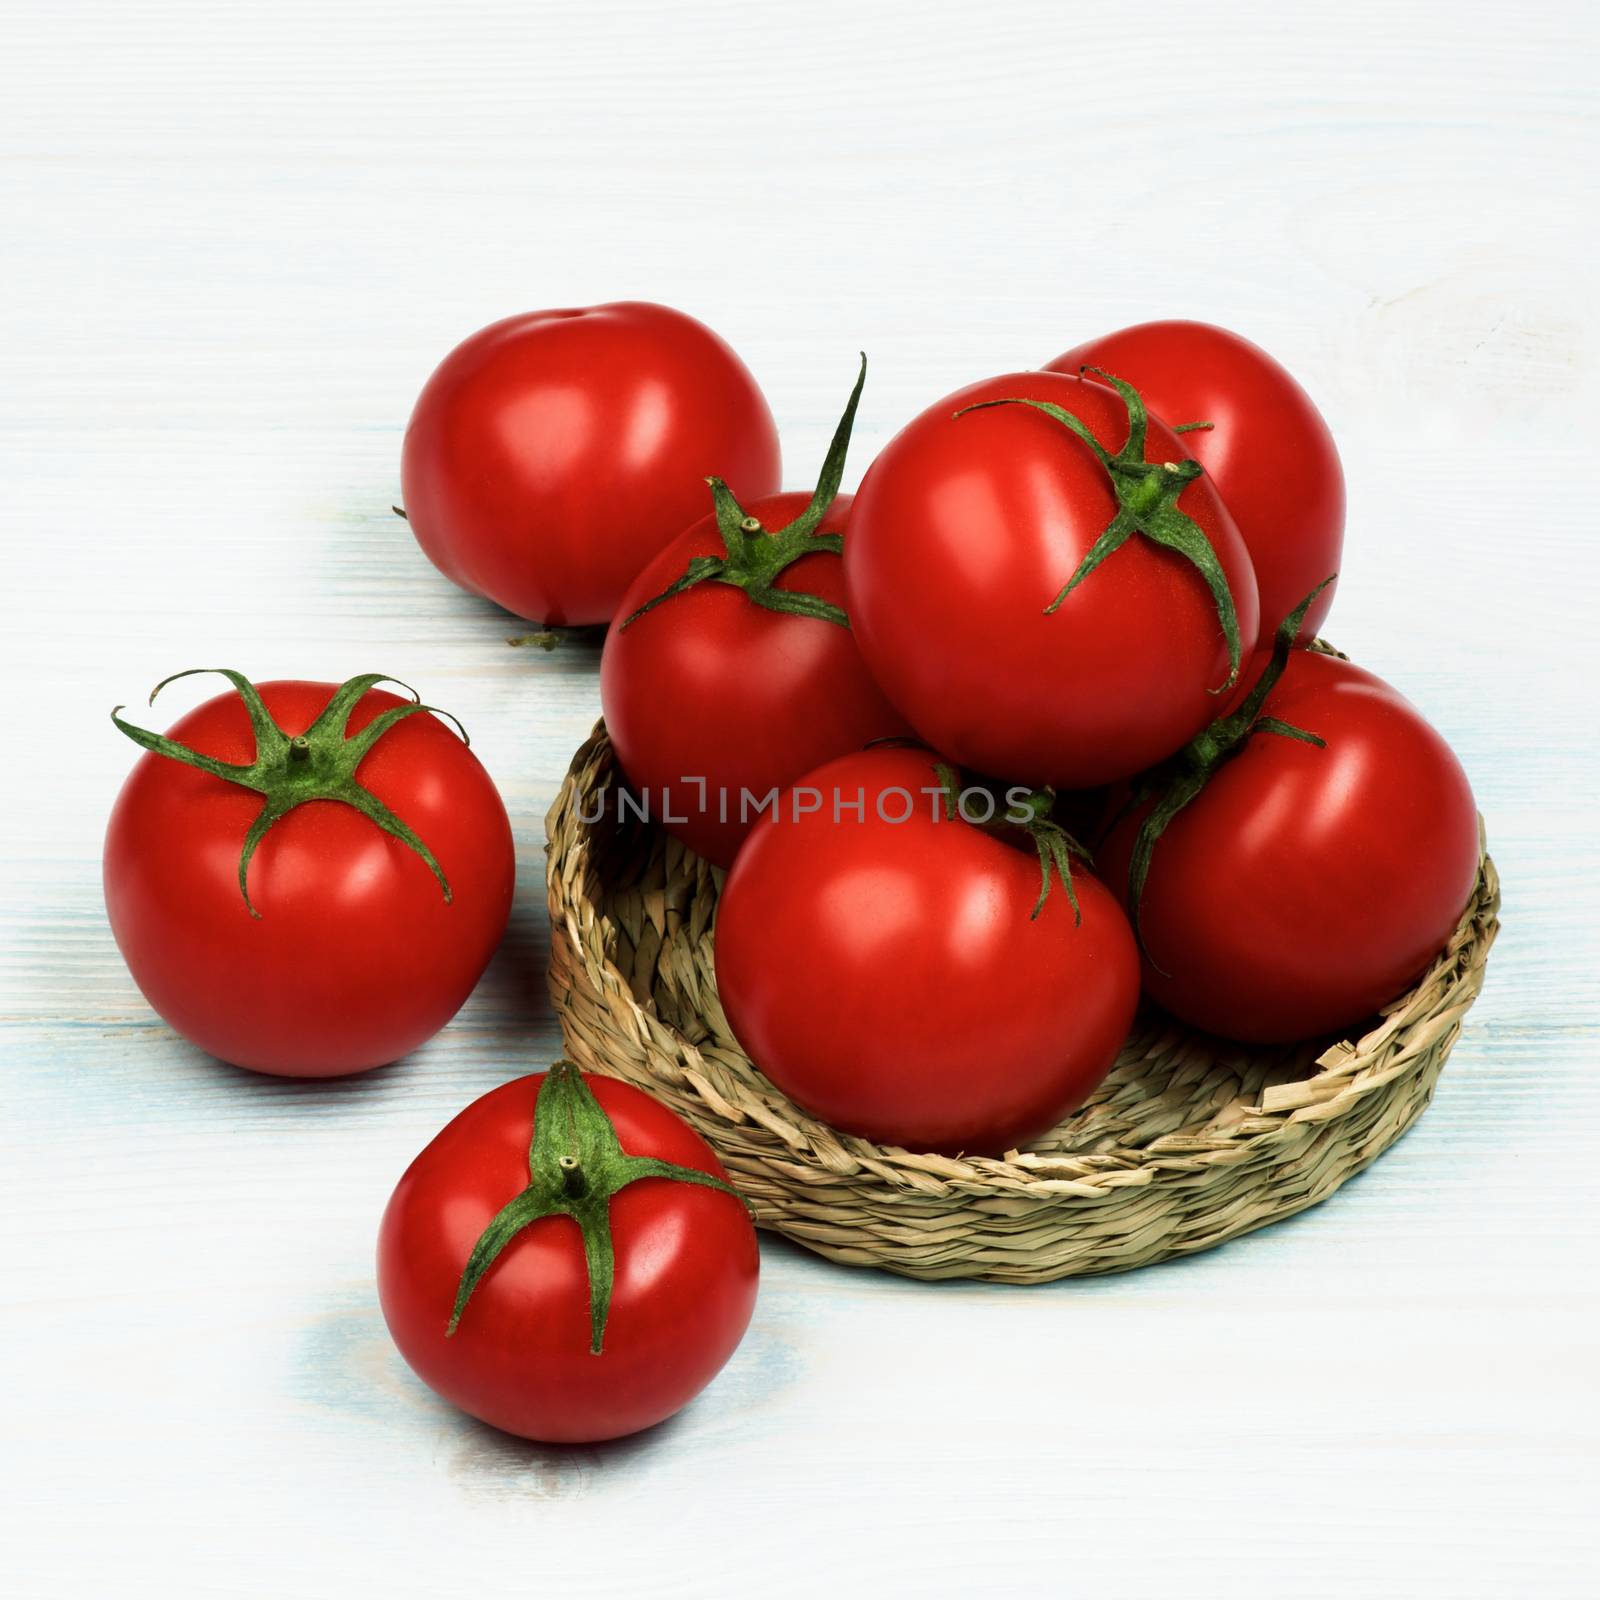 Ripe Tomatoes with Stems by zhekos